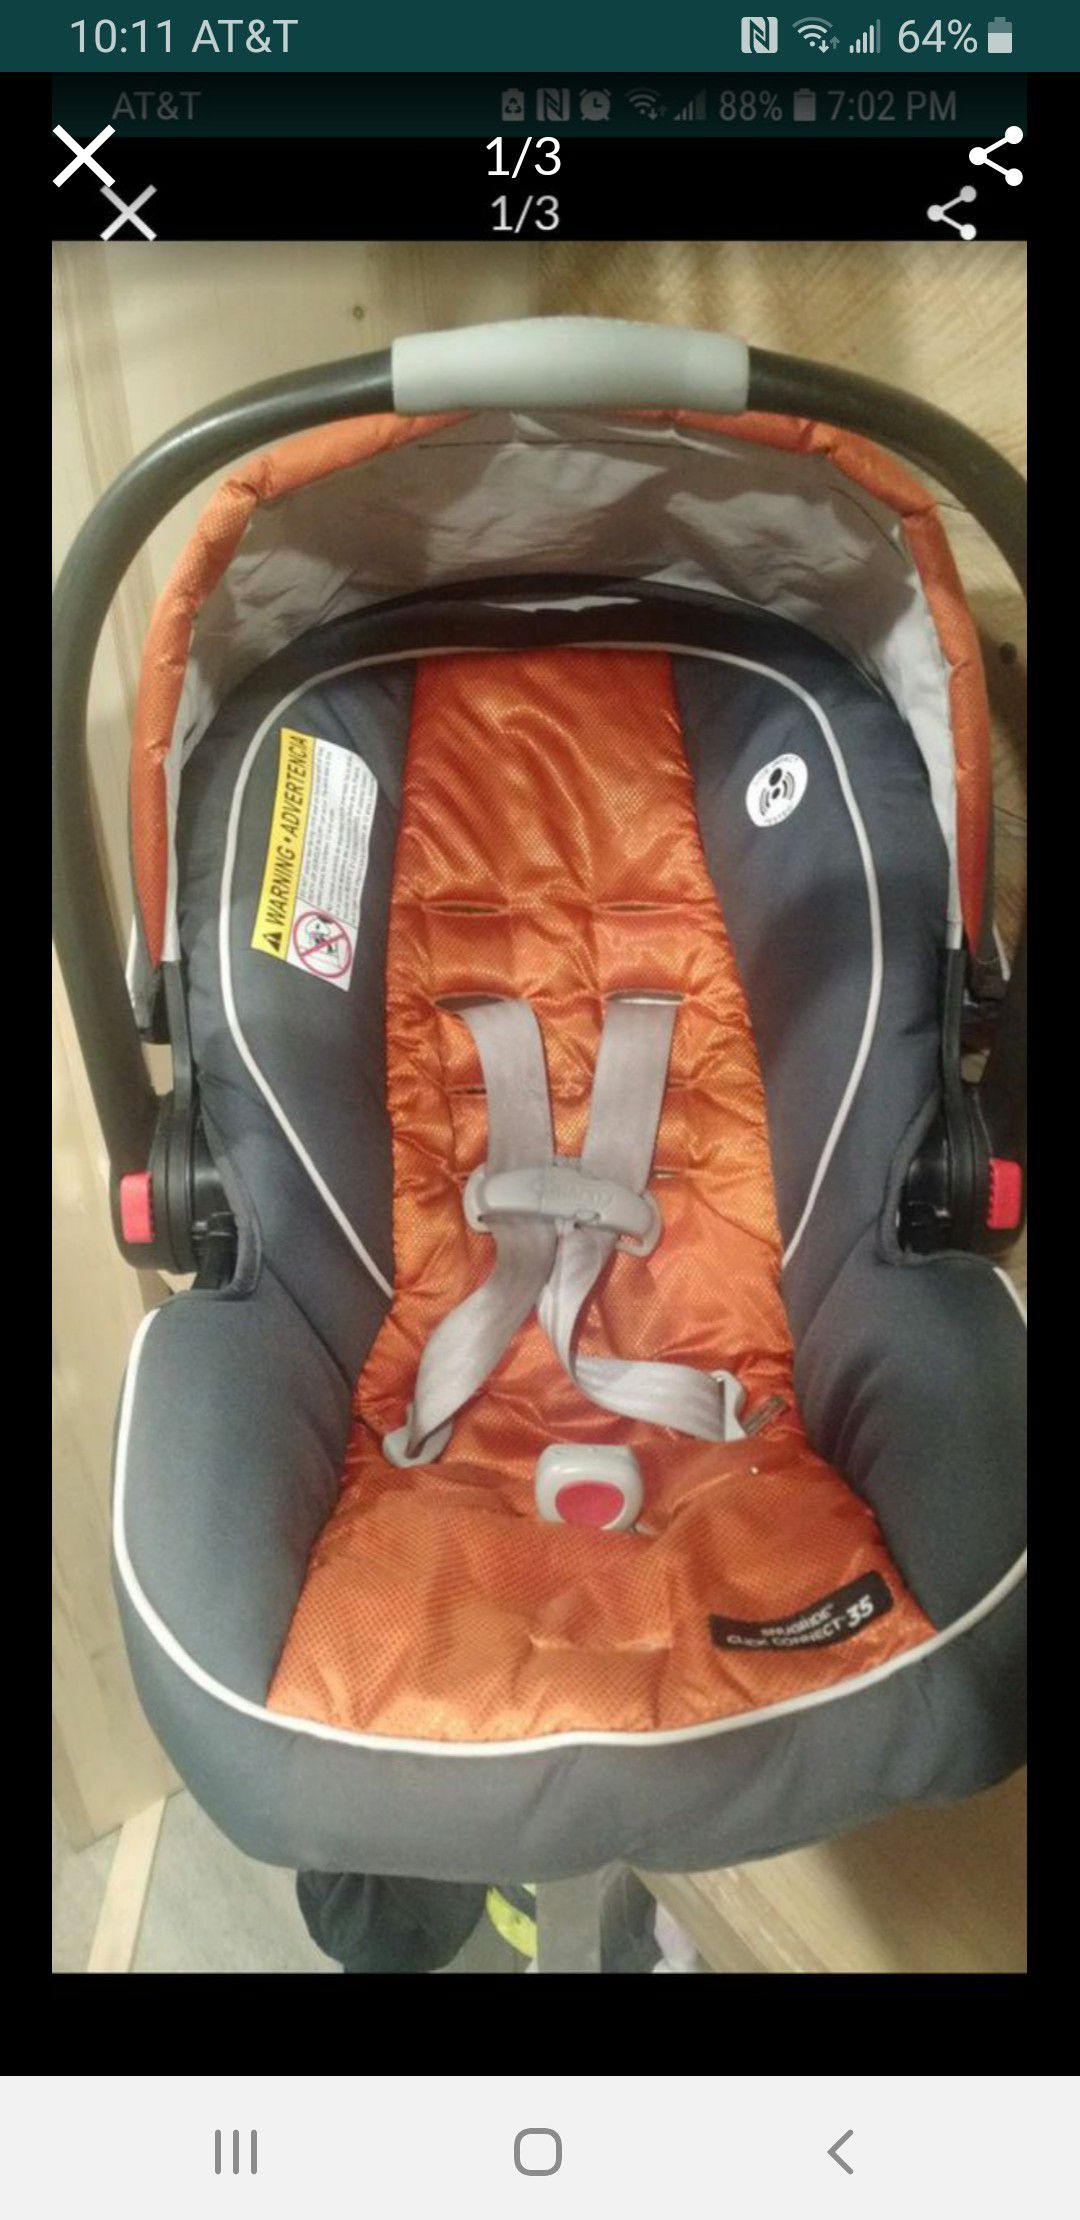 Graco infant carseat